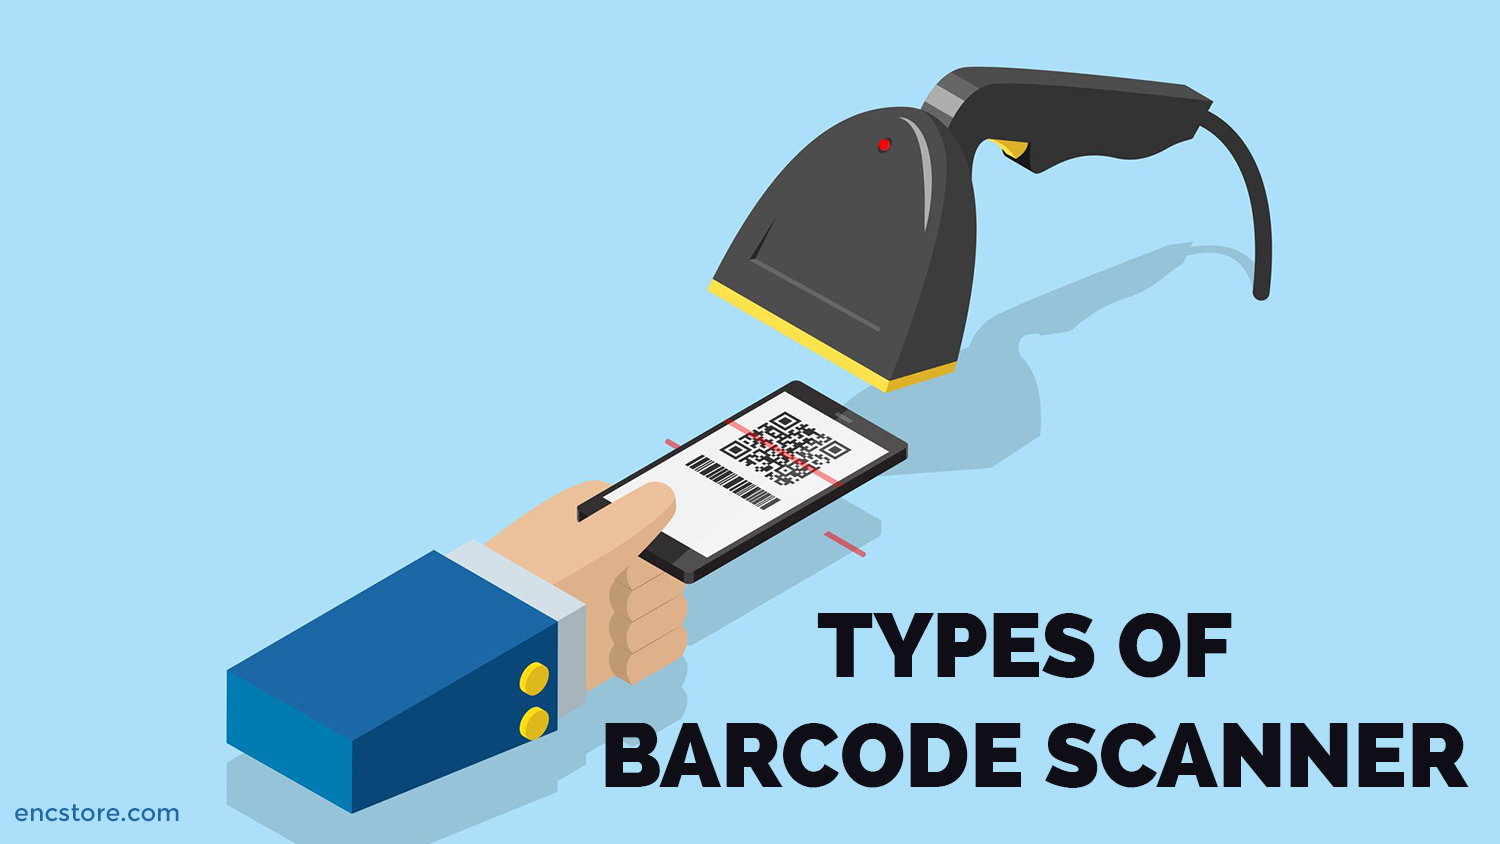 Types of Barcode Scanner